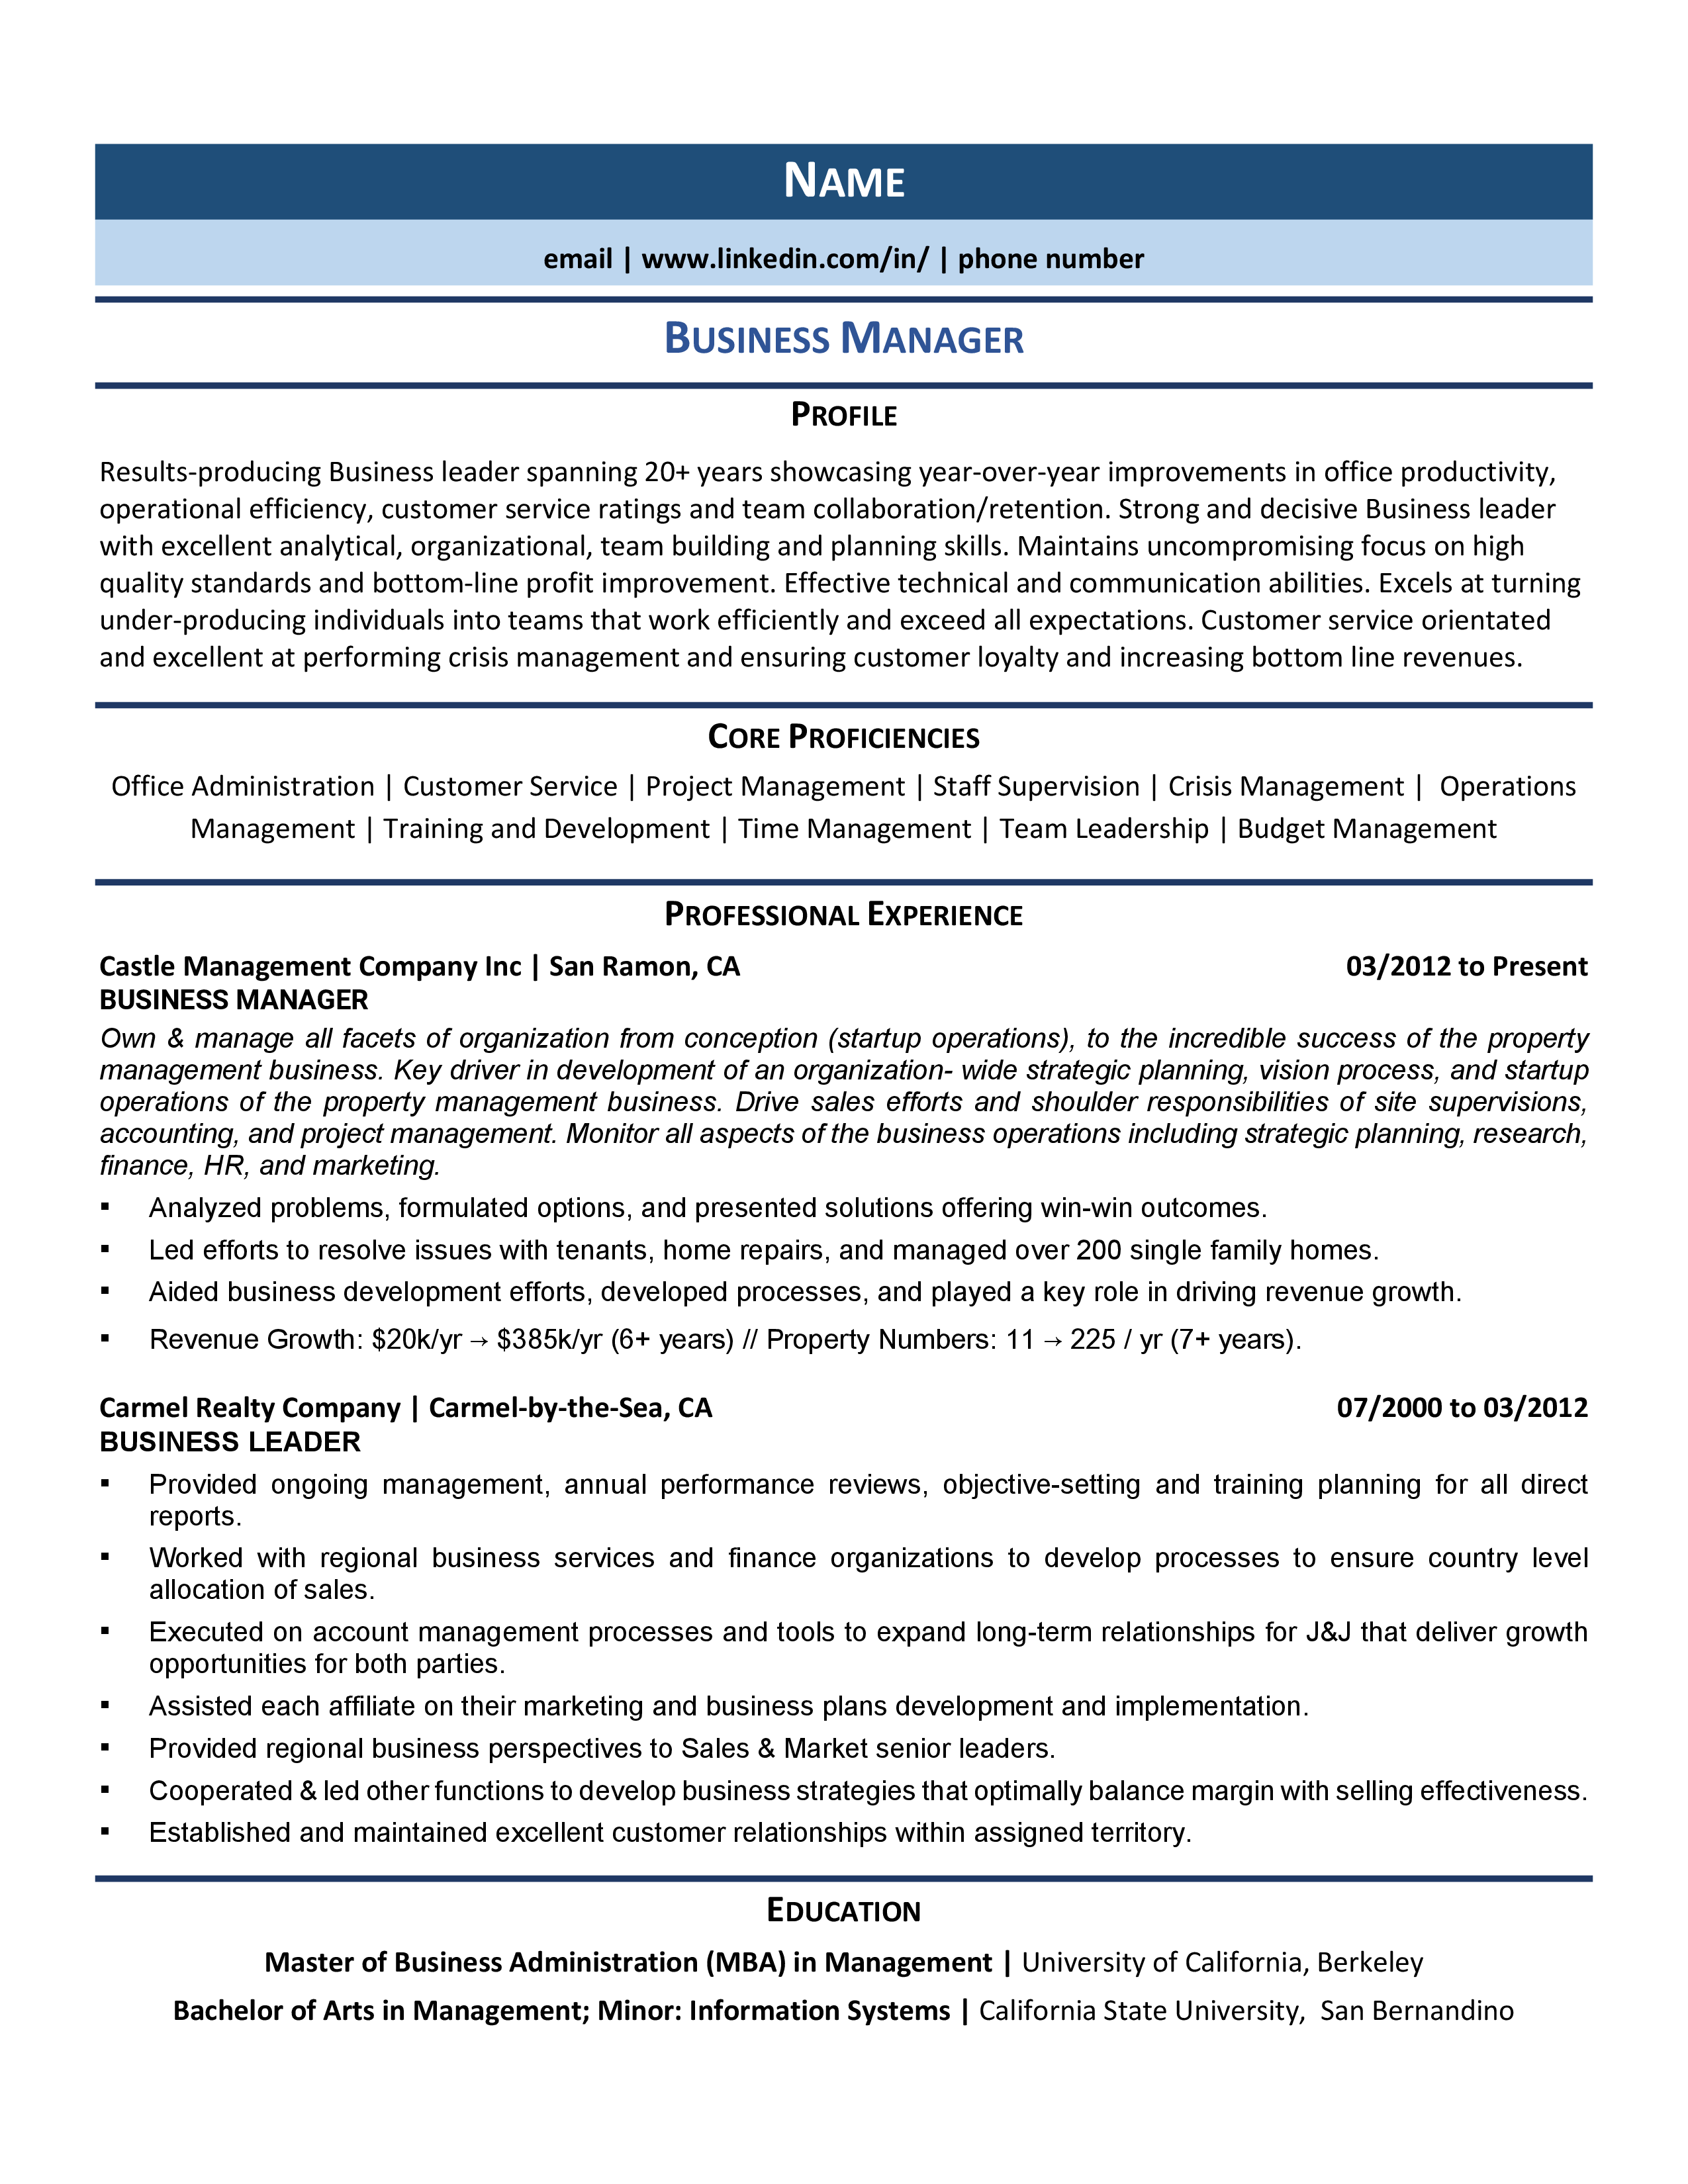 general work summary for resume